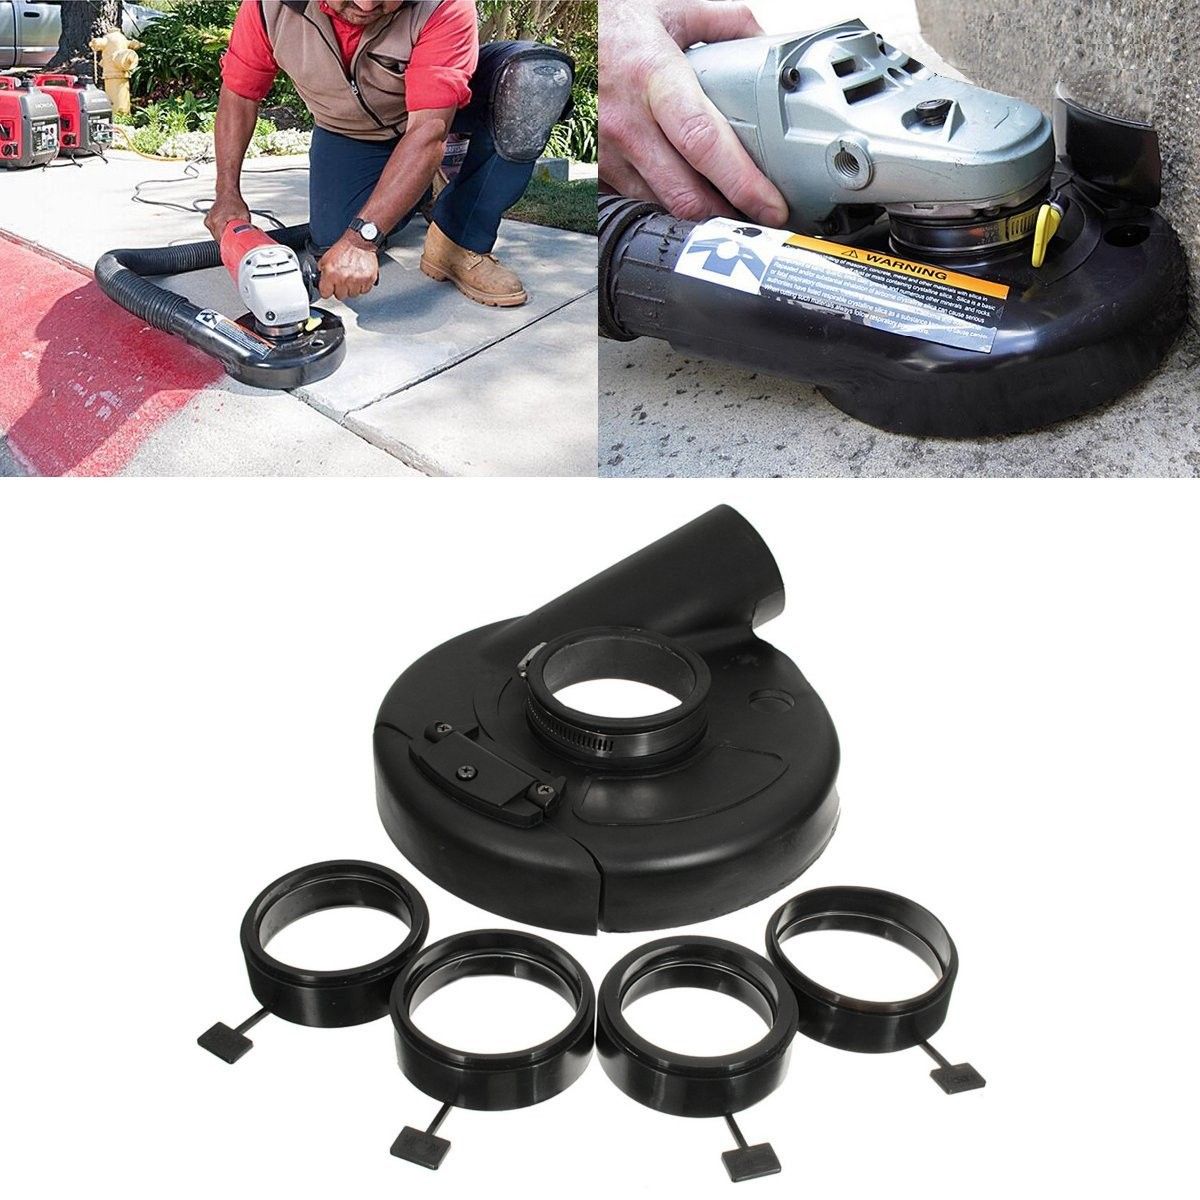 18cm-Black-Vacuum-Dust-Shroud-Cover-for-Angle-Grinder-Hand-Grind-Convertible-1191601